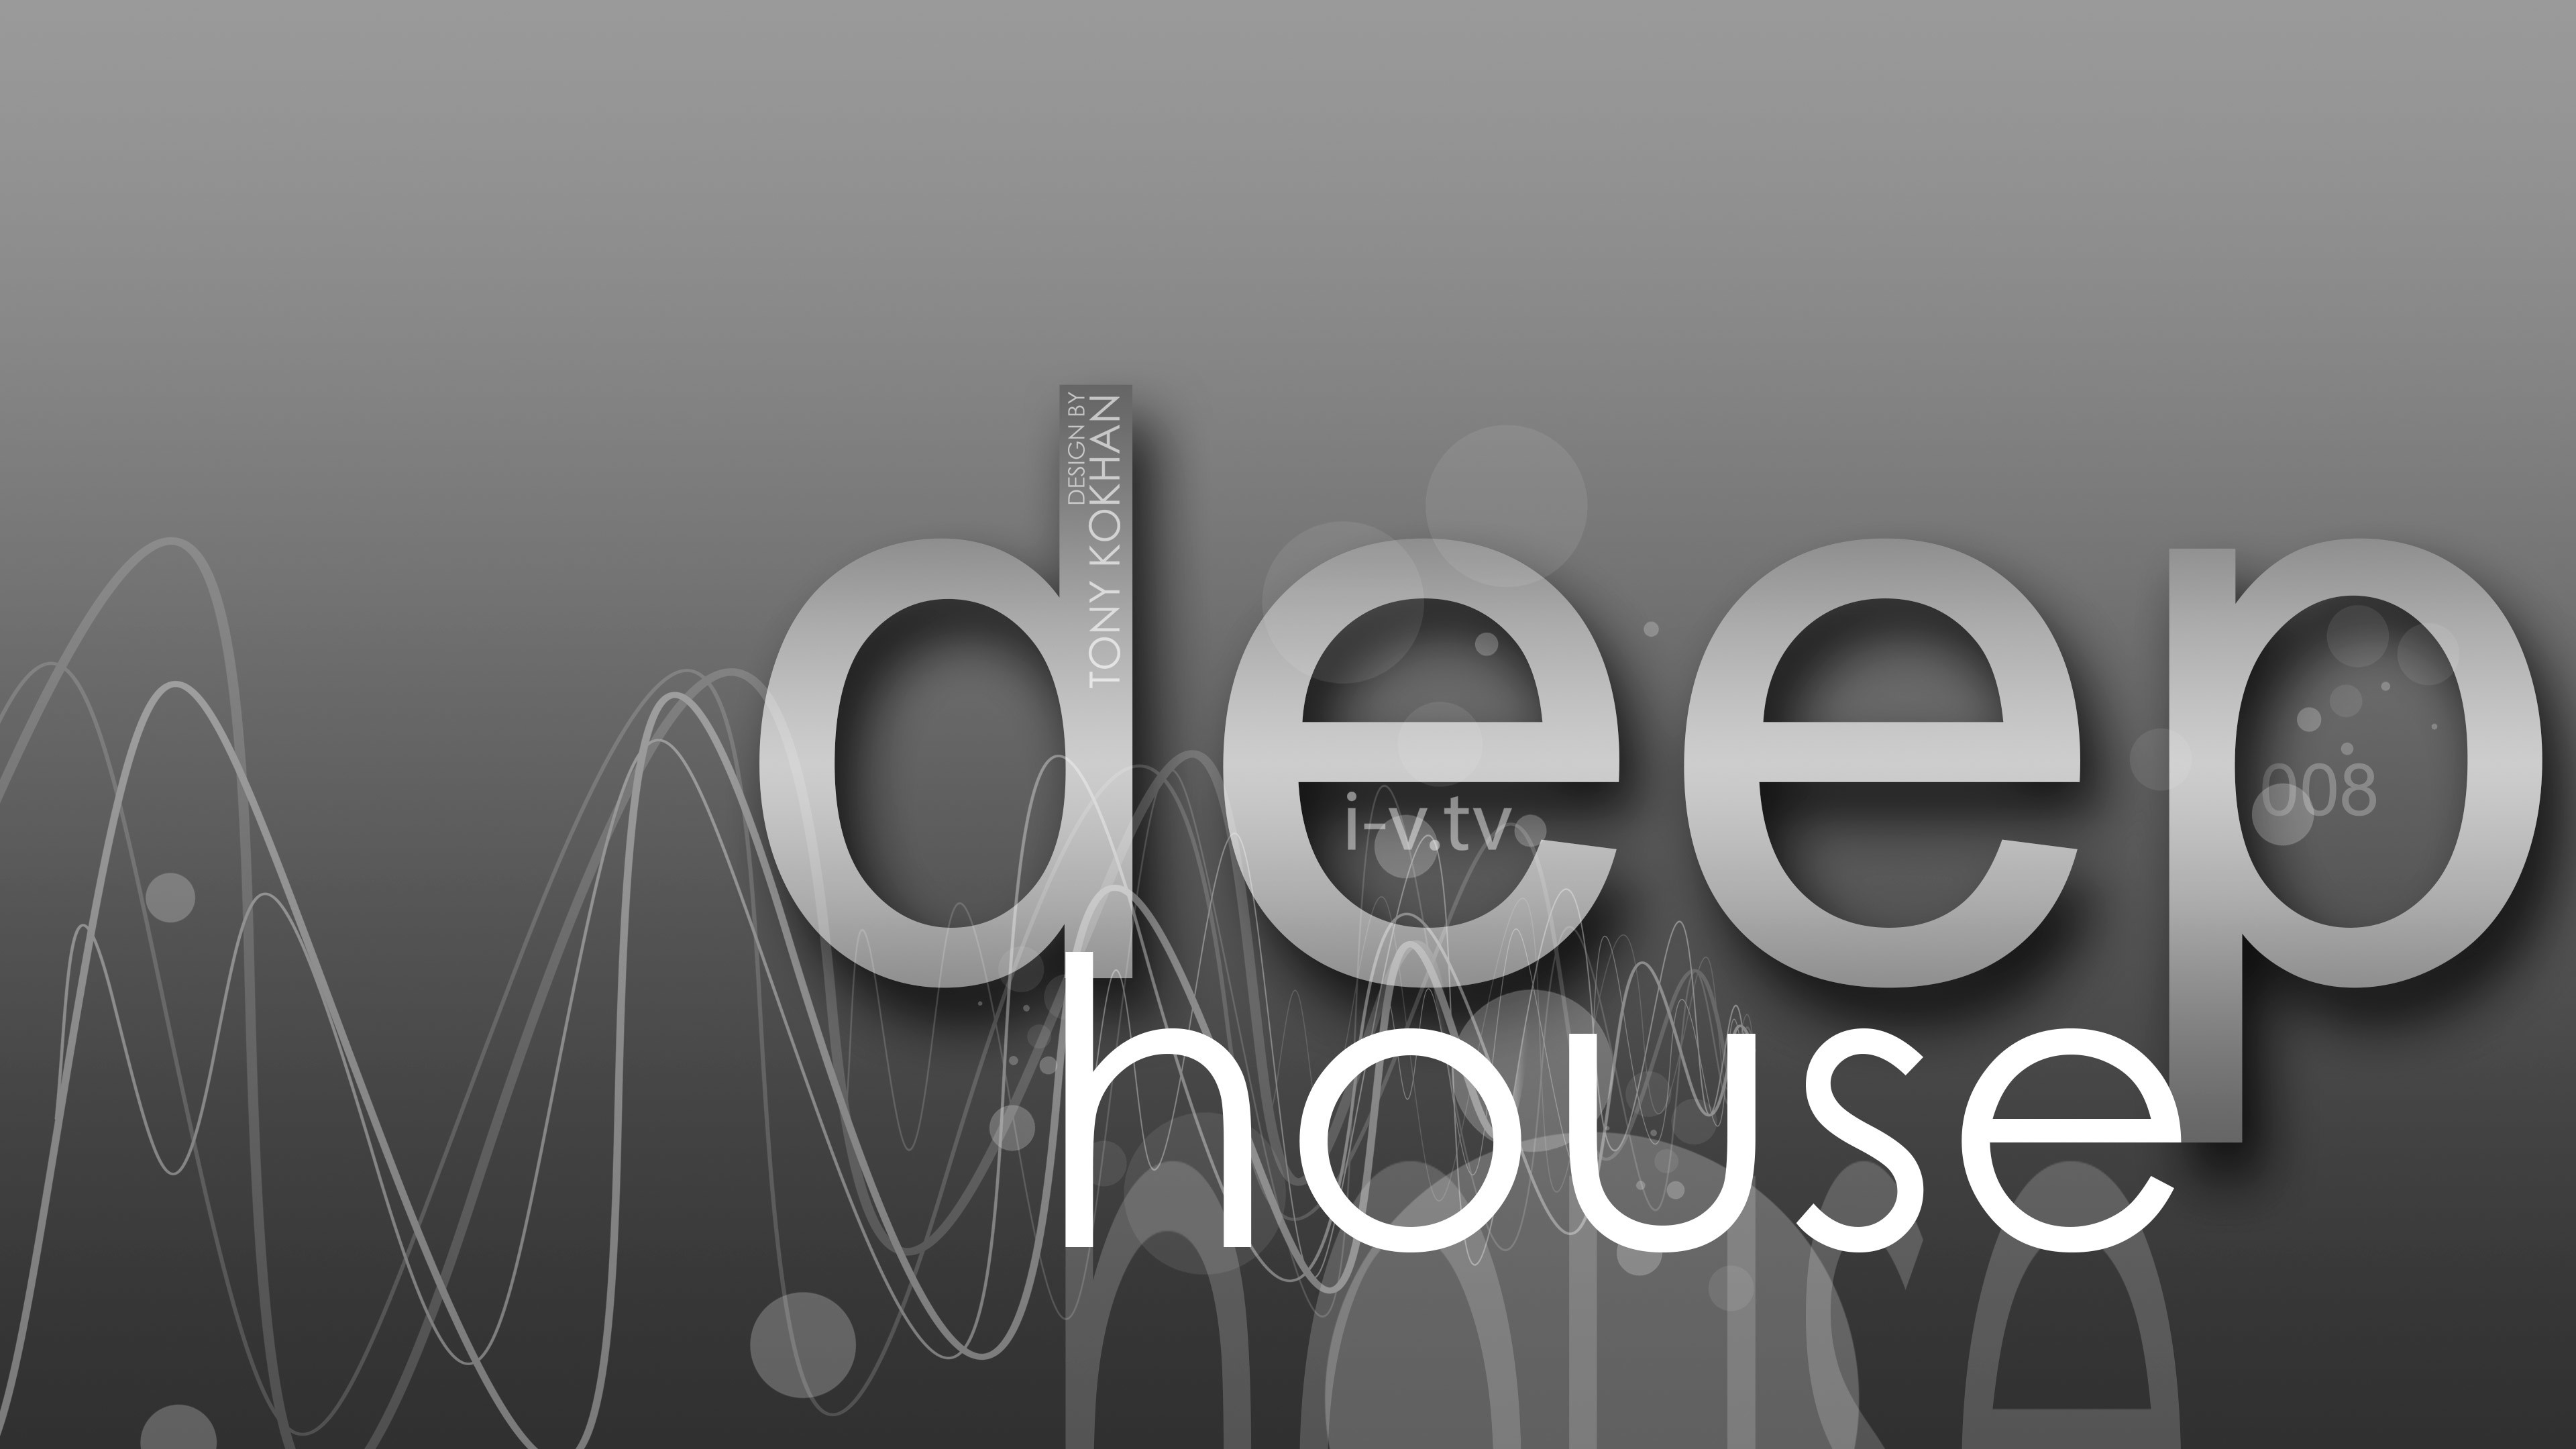 3840x2160 ... Deep-House-Music-Abstract-Sound-eQ-Words-Style-